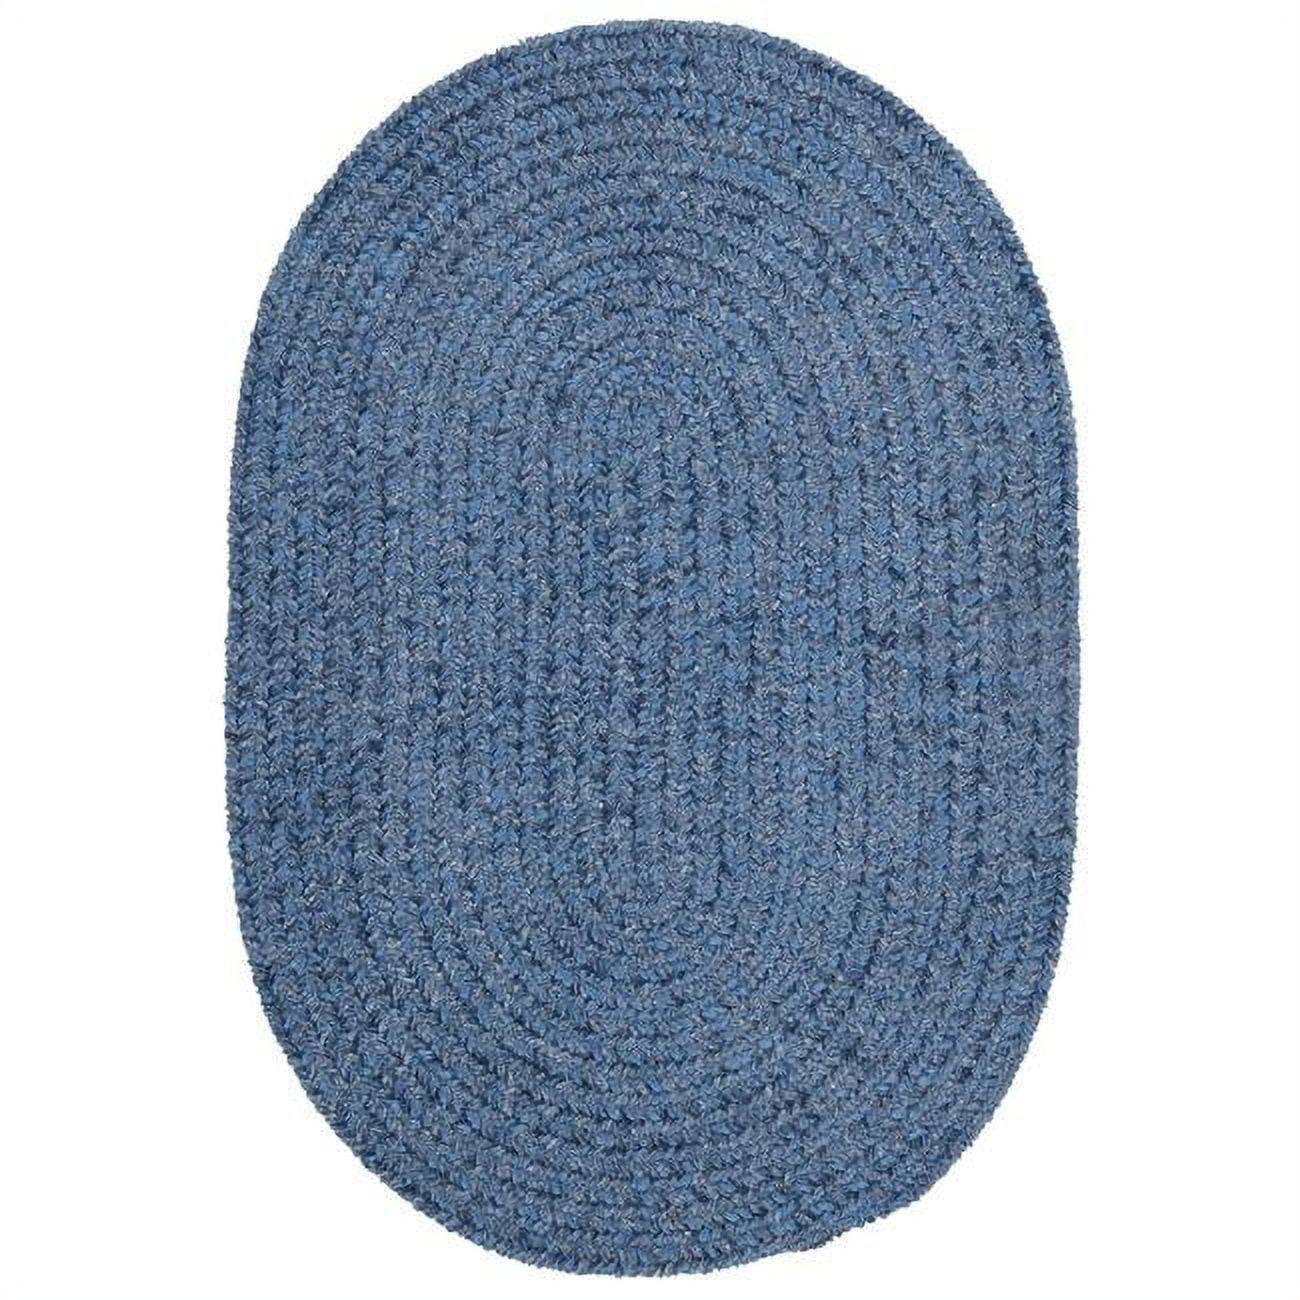 Colonial Mills - Barefoot Chenille Bath Rug - Yellow 1'5x2'3 Oval